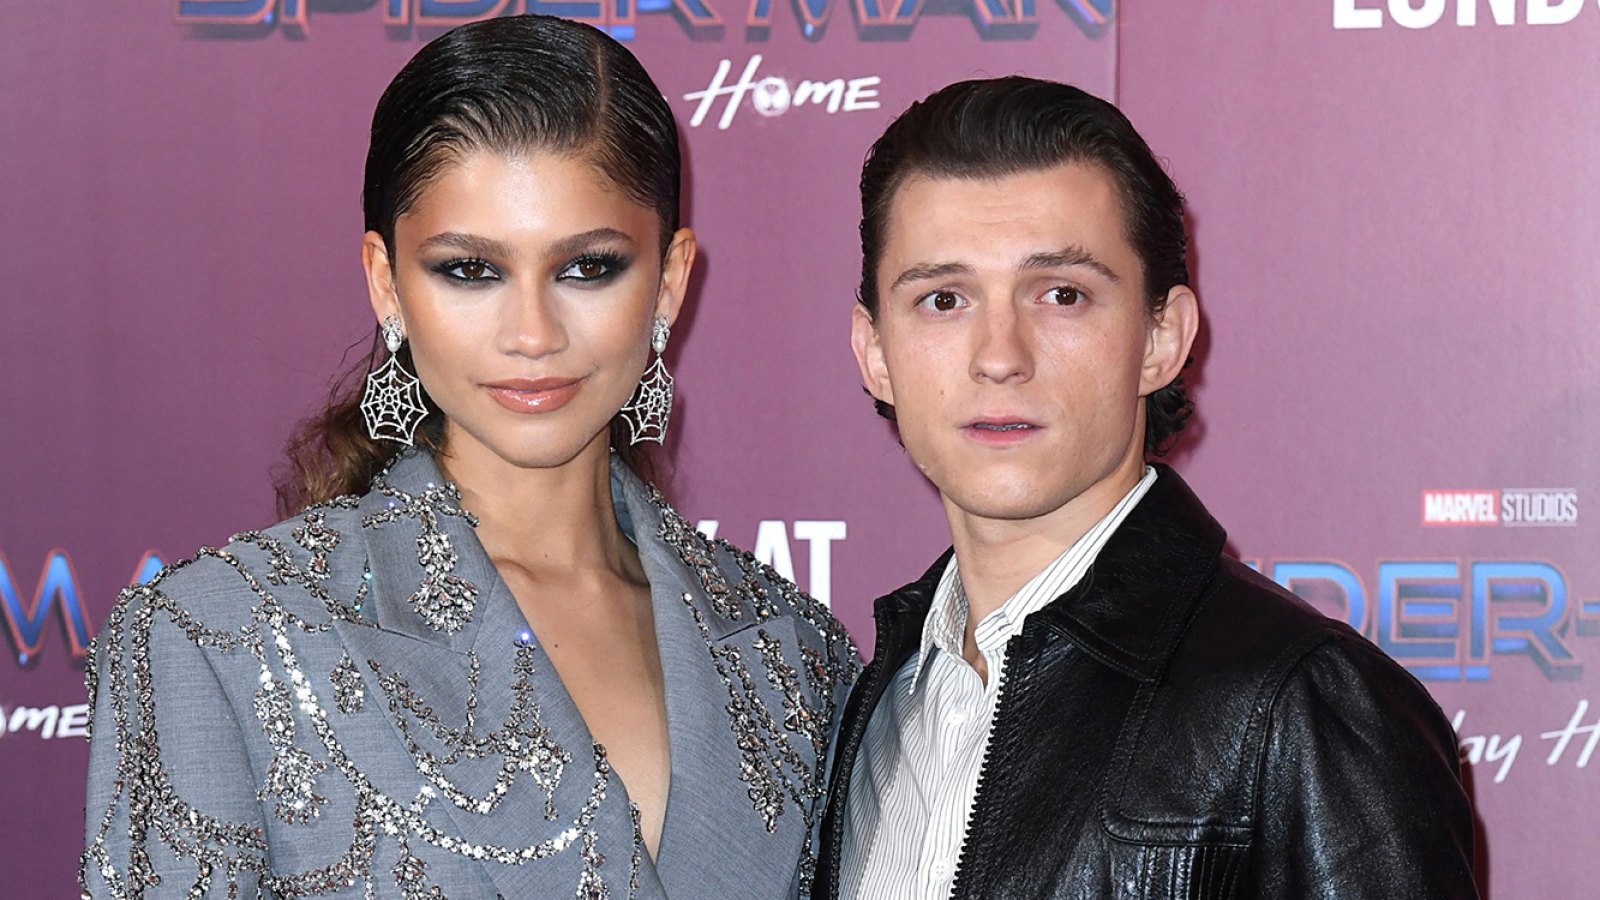 Tom Holland and Zendaya Were Told Not to Date, ‘Spider-Man’ Producer Reveals